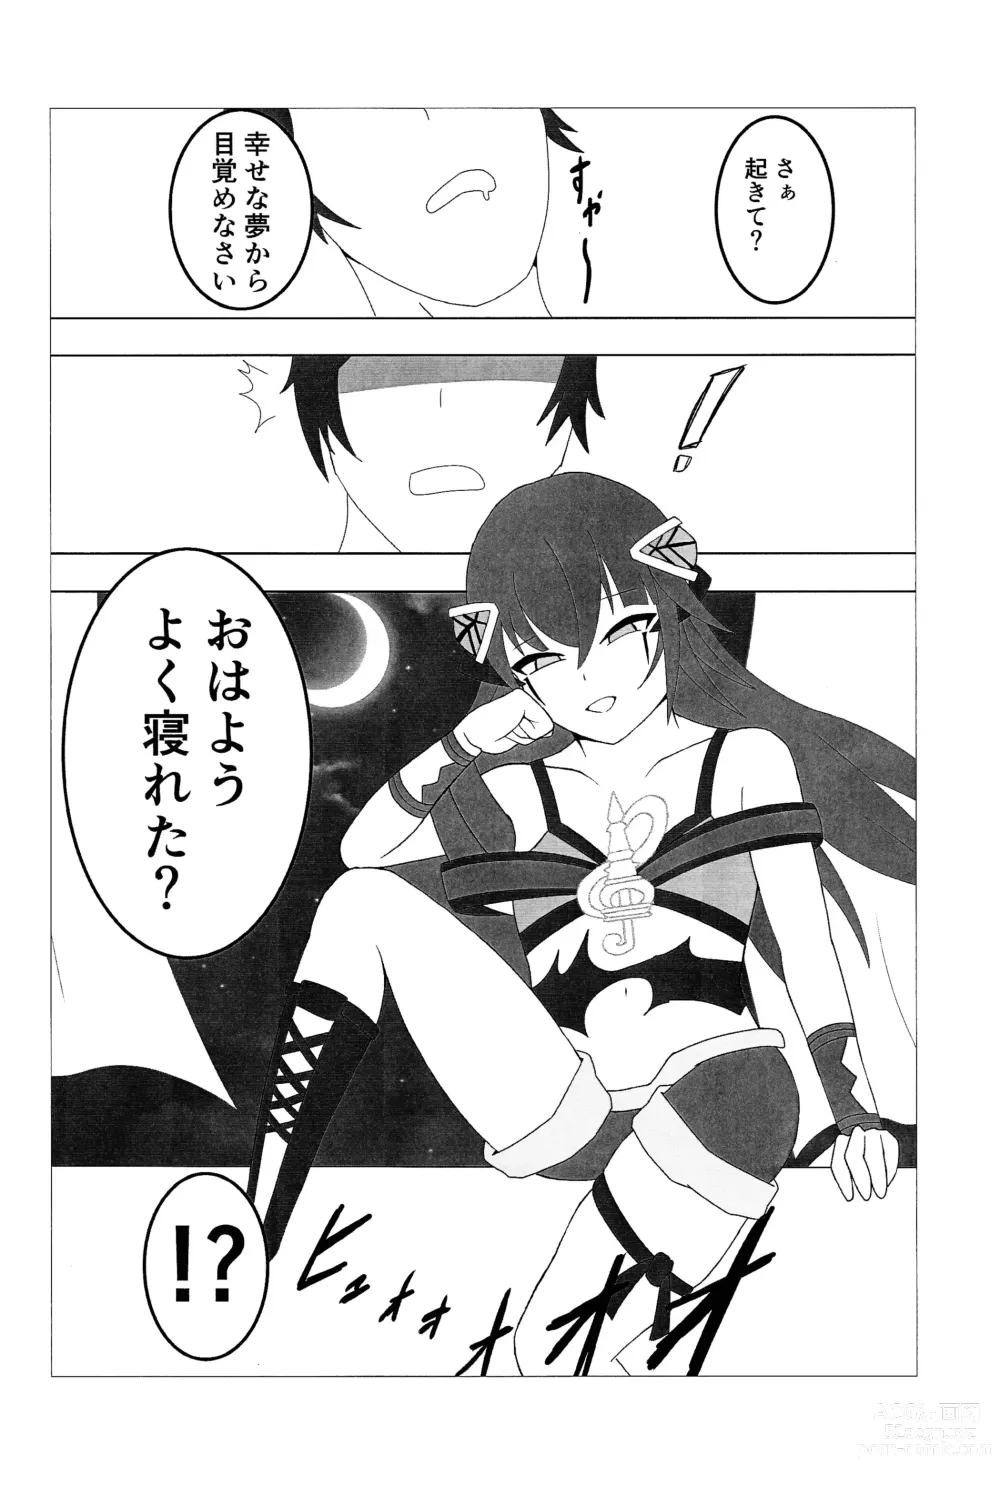 Page 3 of doujinshi FLAMES OF THIS AFFECTION